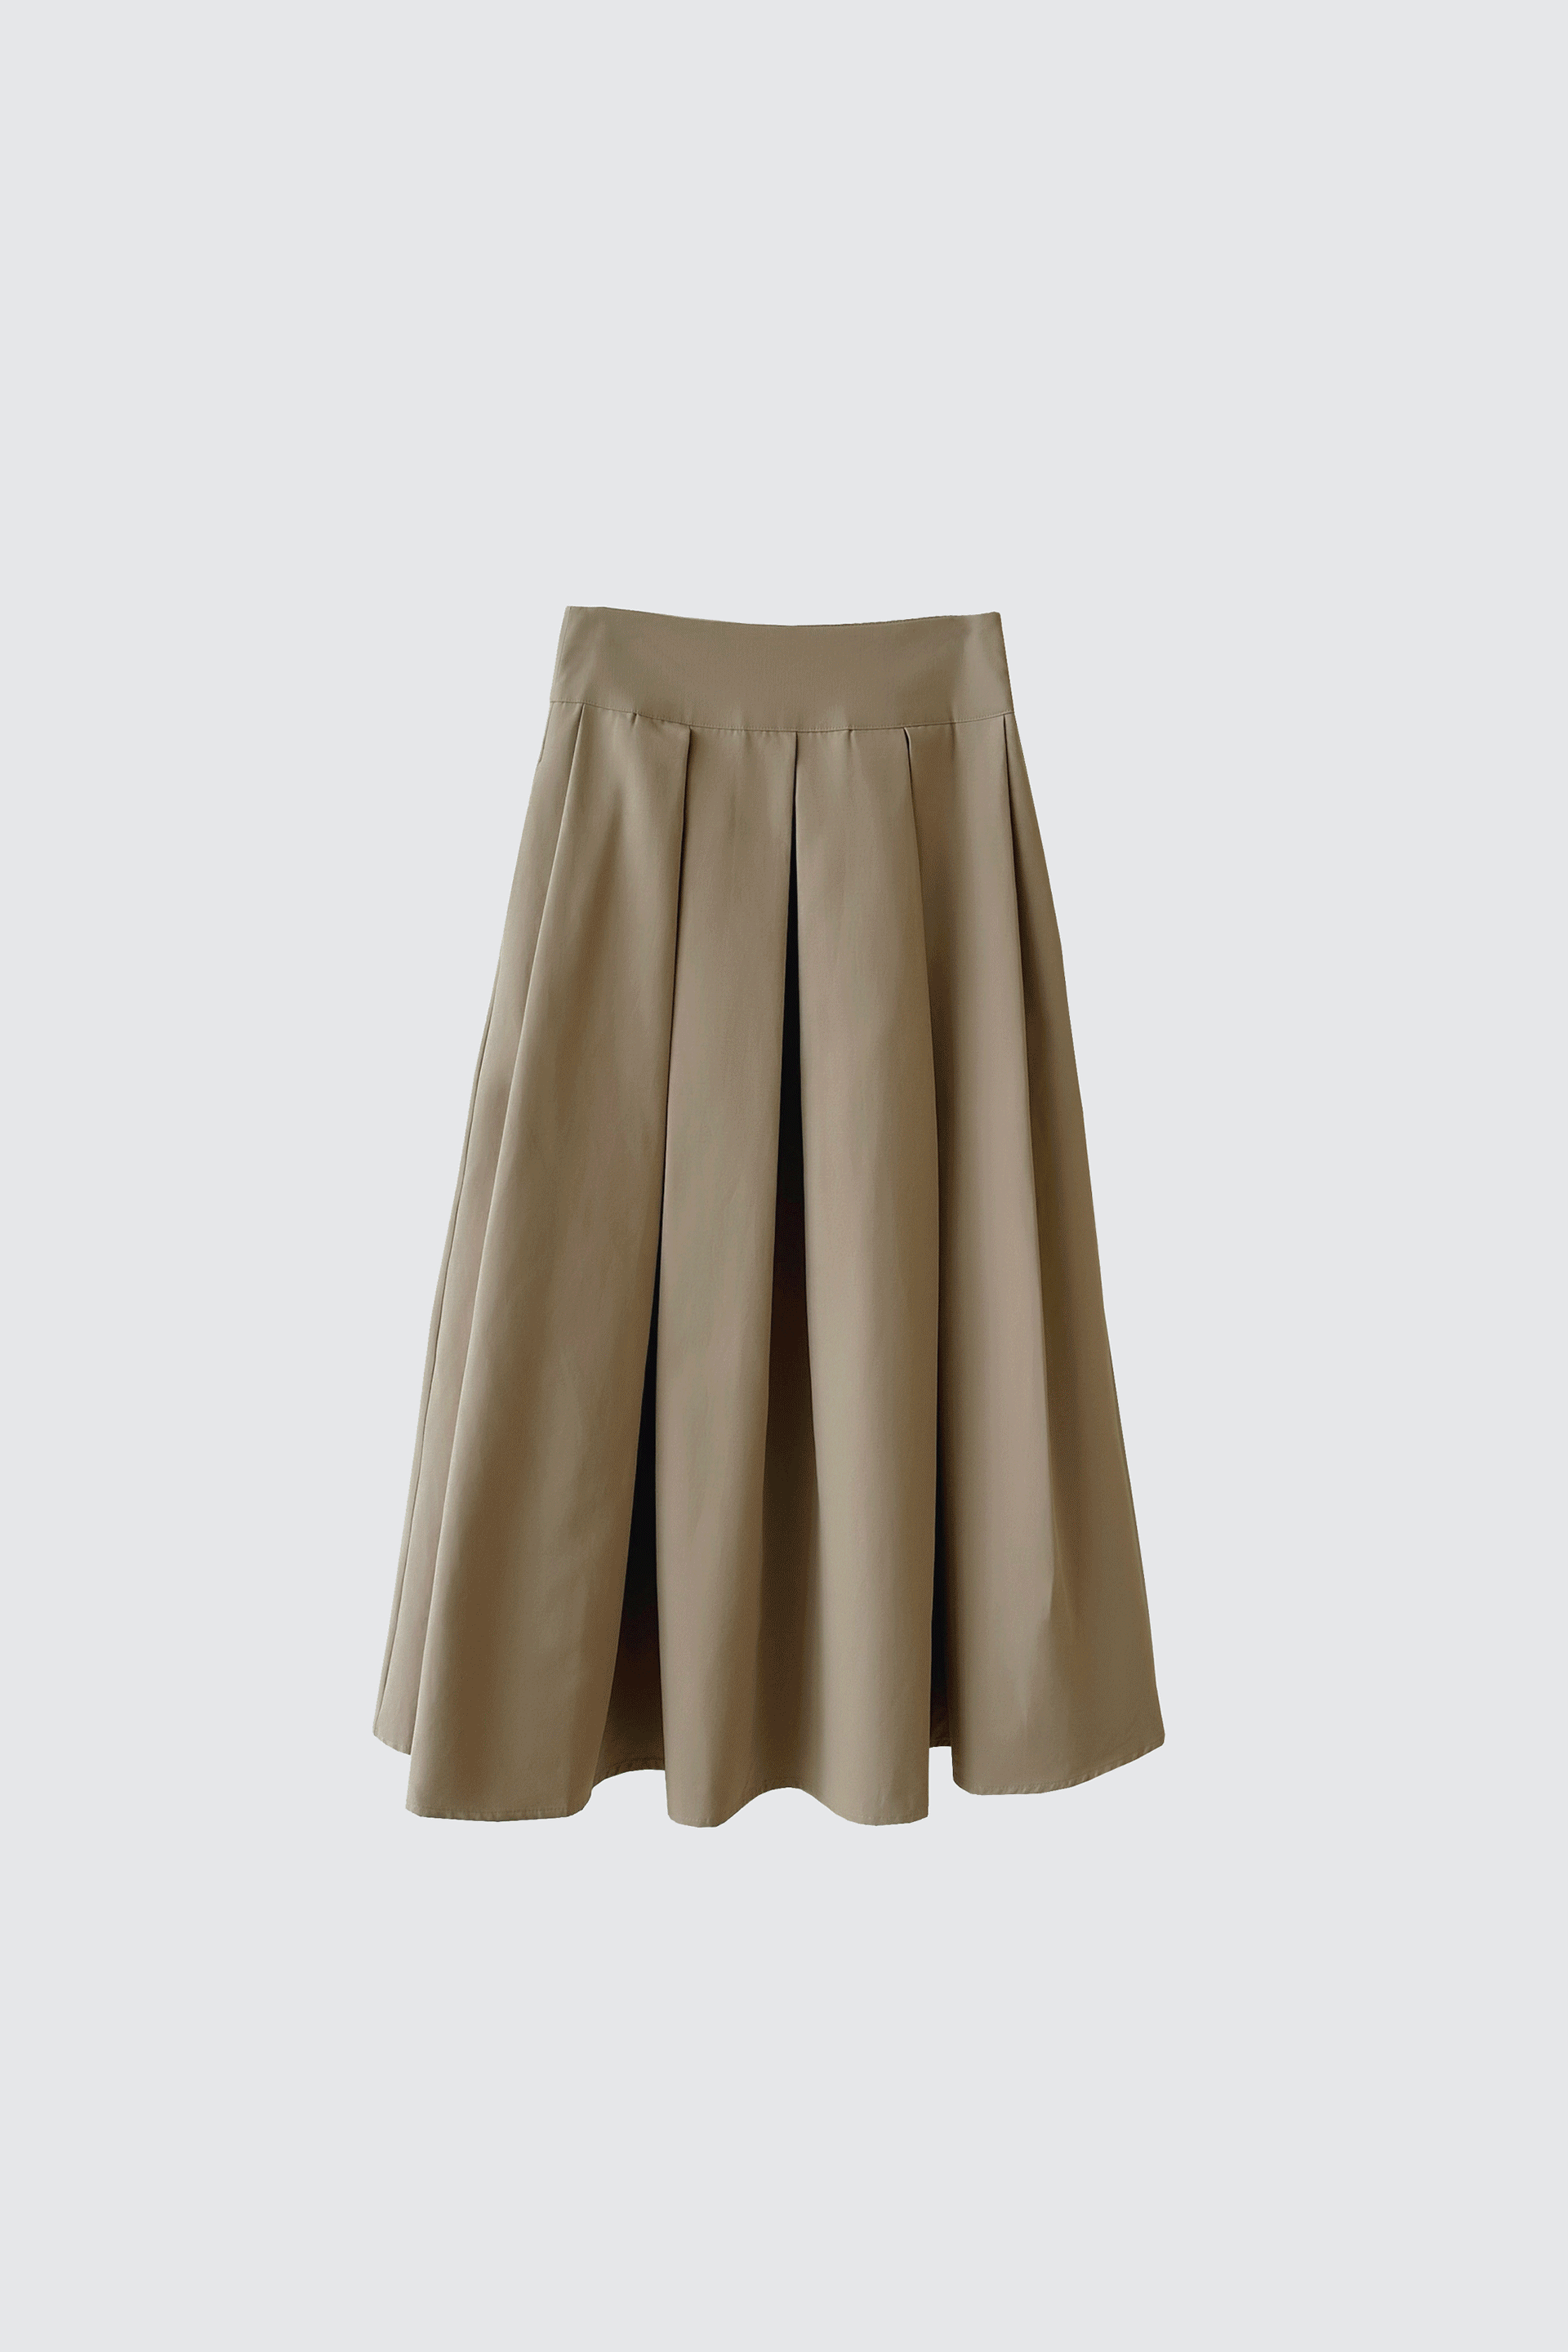 [MADE] TRENCH SKIRT(BEIGE)당일발송